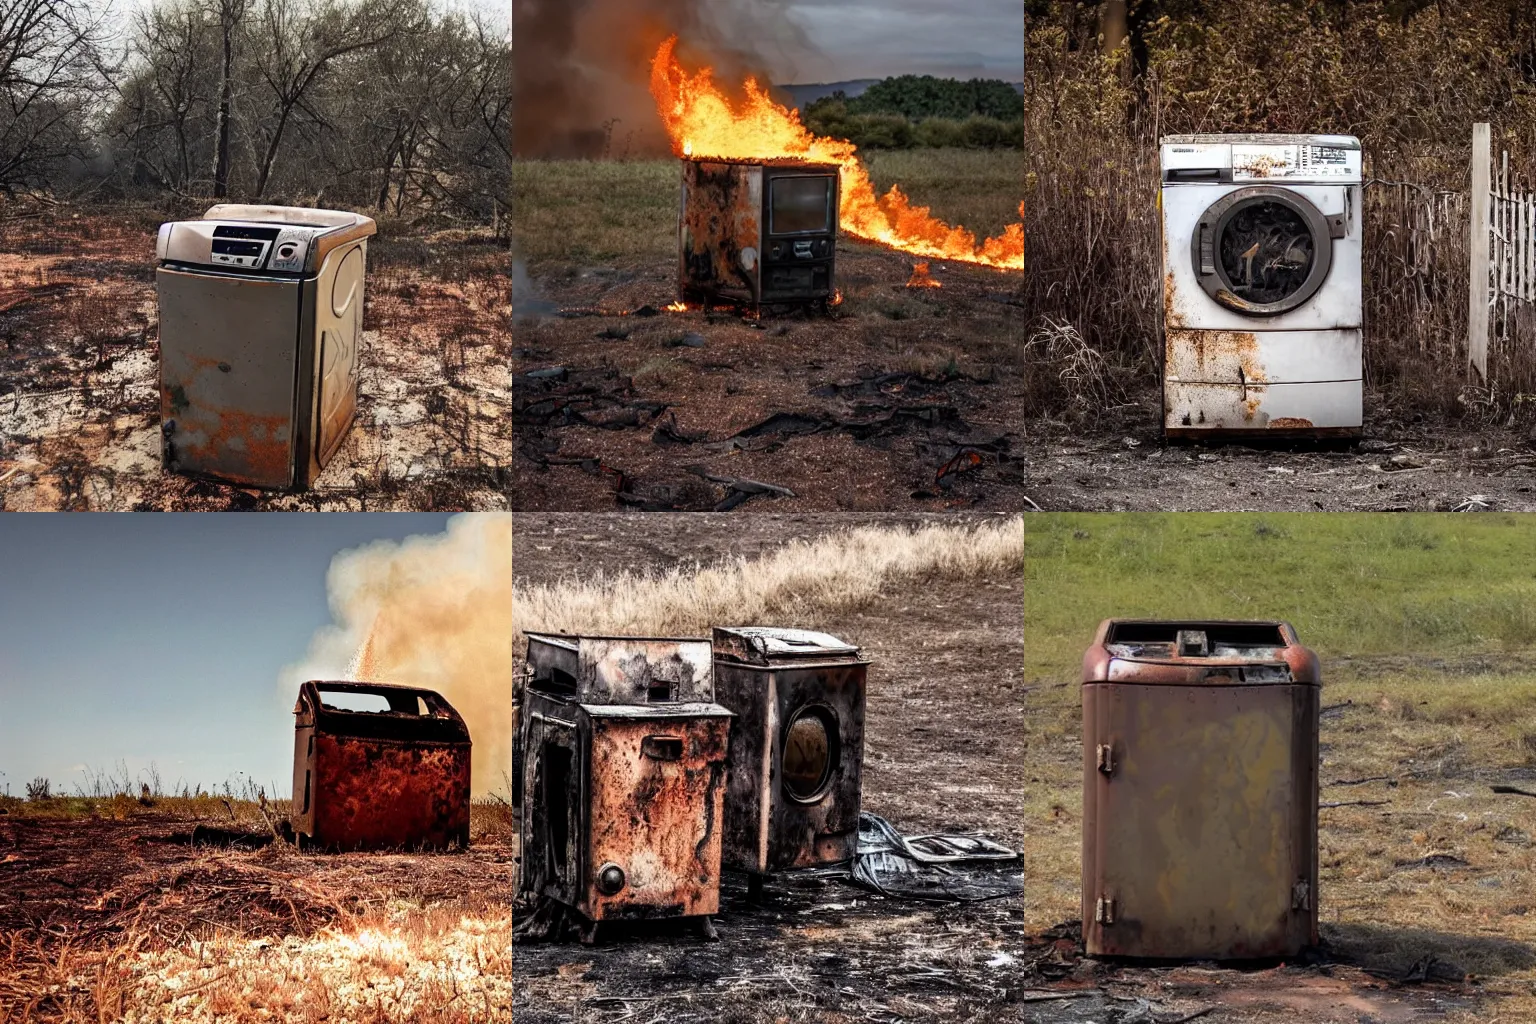 Prompt: a photo of a burning rusted washing machine that is on fire standing in a dried out field